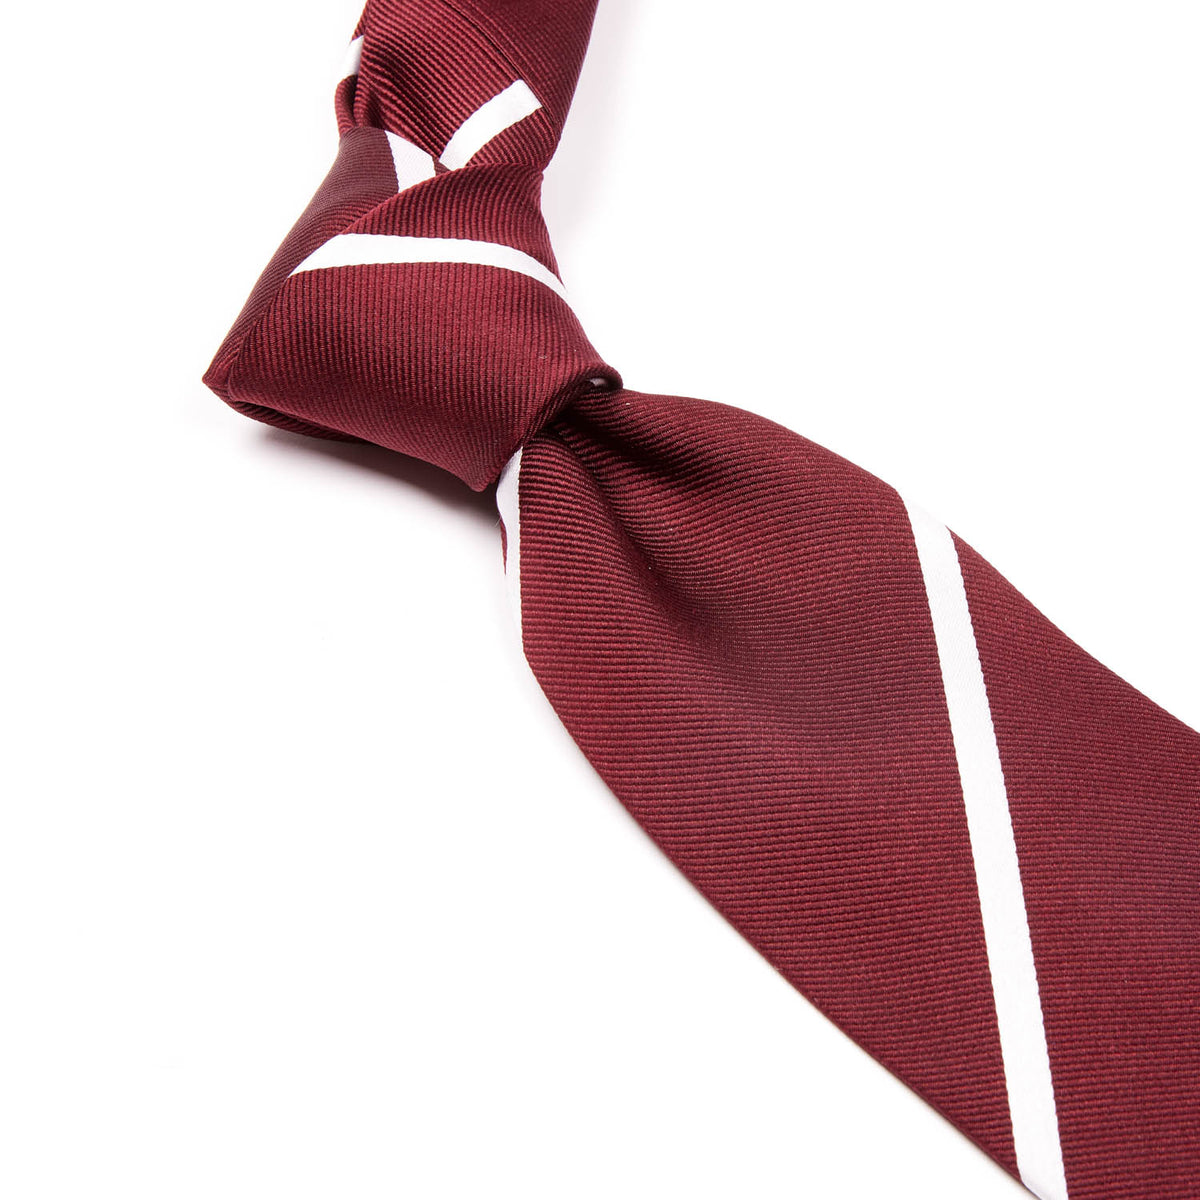 A Sovereign Grade Oxblood Narrow Rep Tie, 150 cm by KirbyAllison.com with premium linings on a white background.